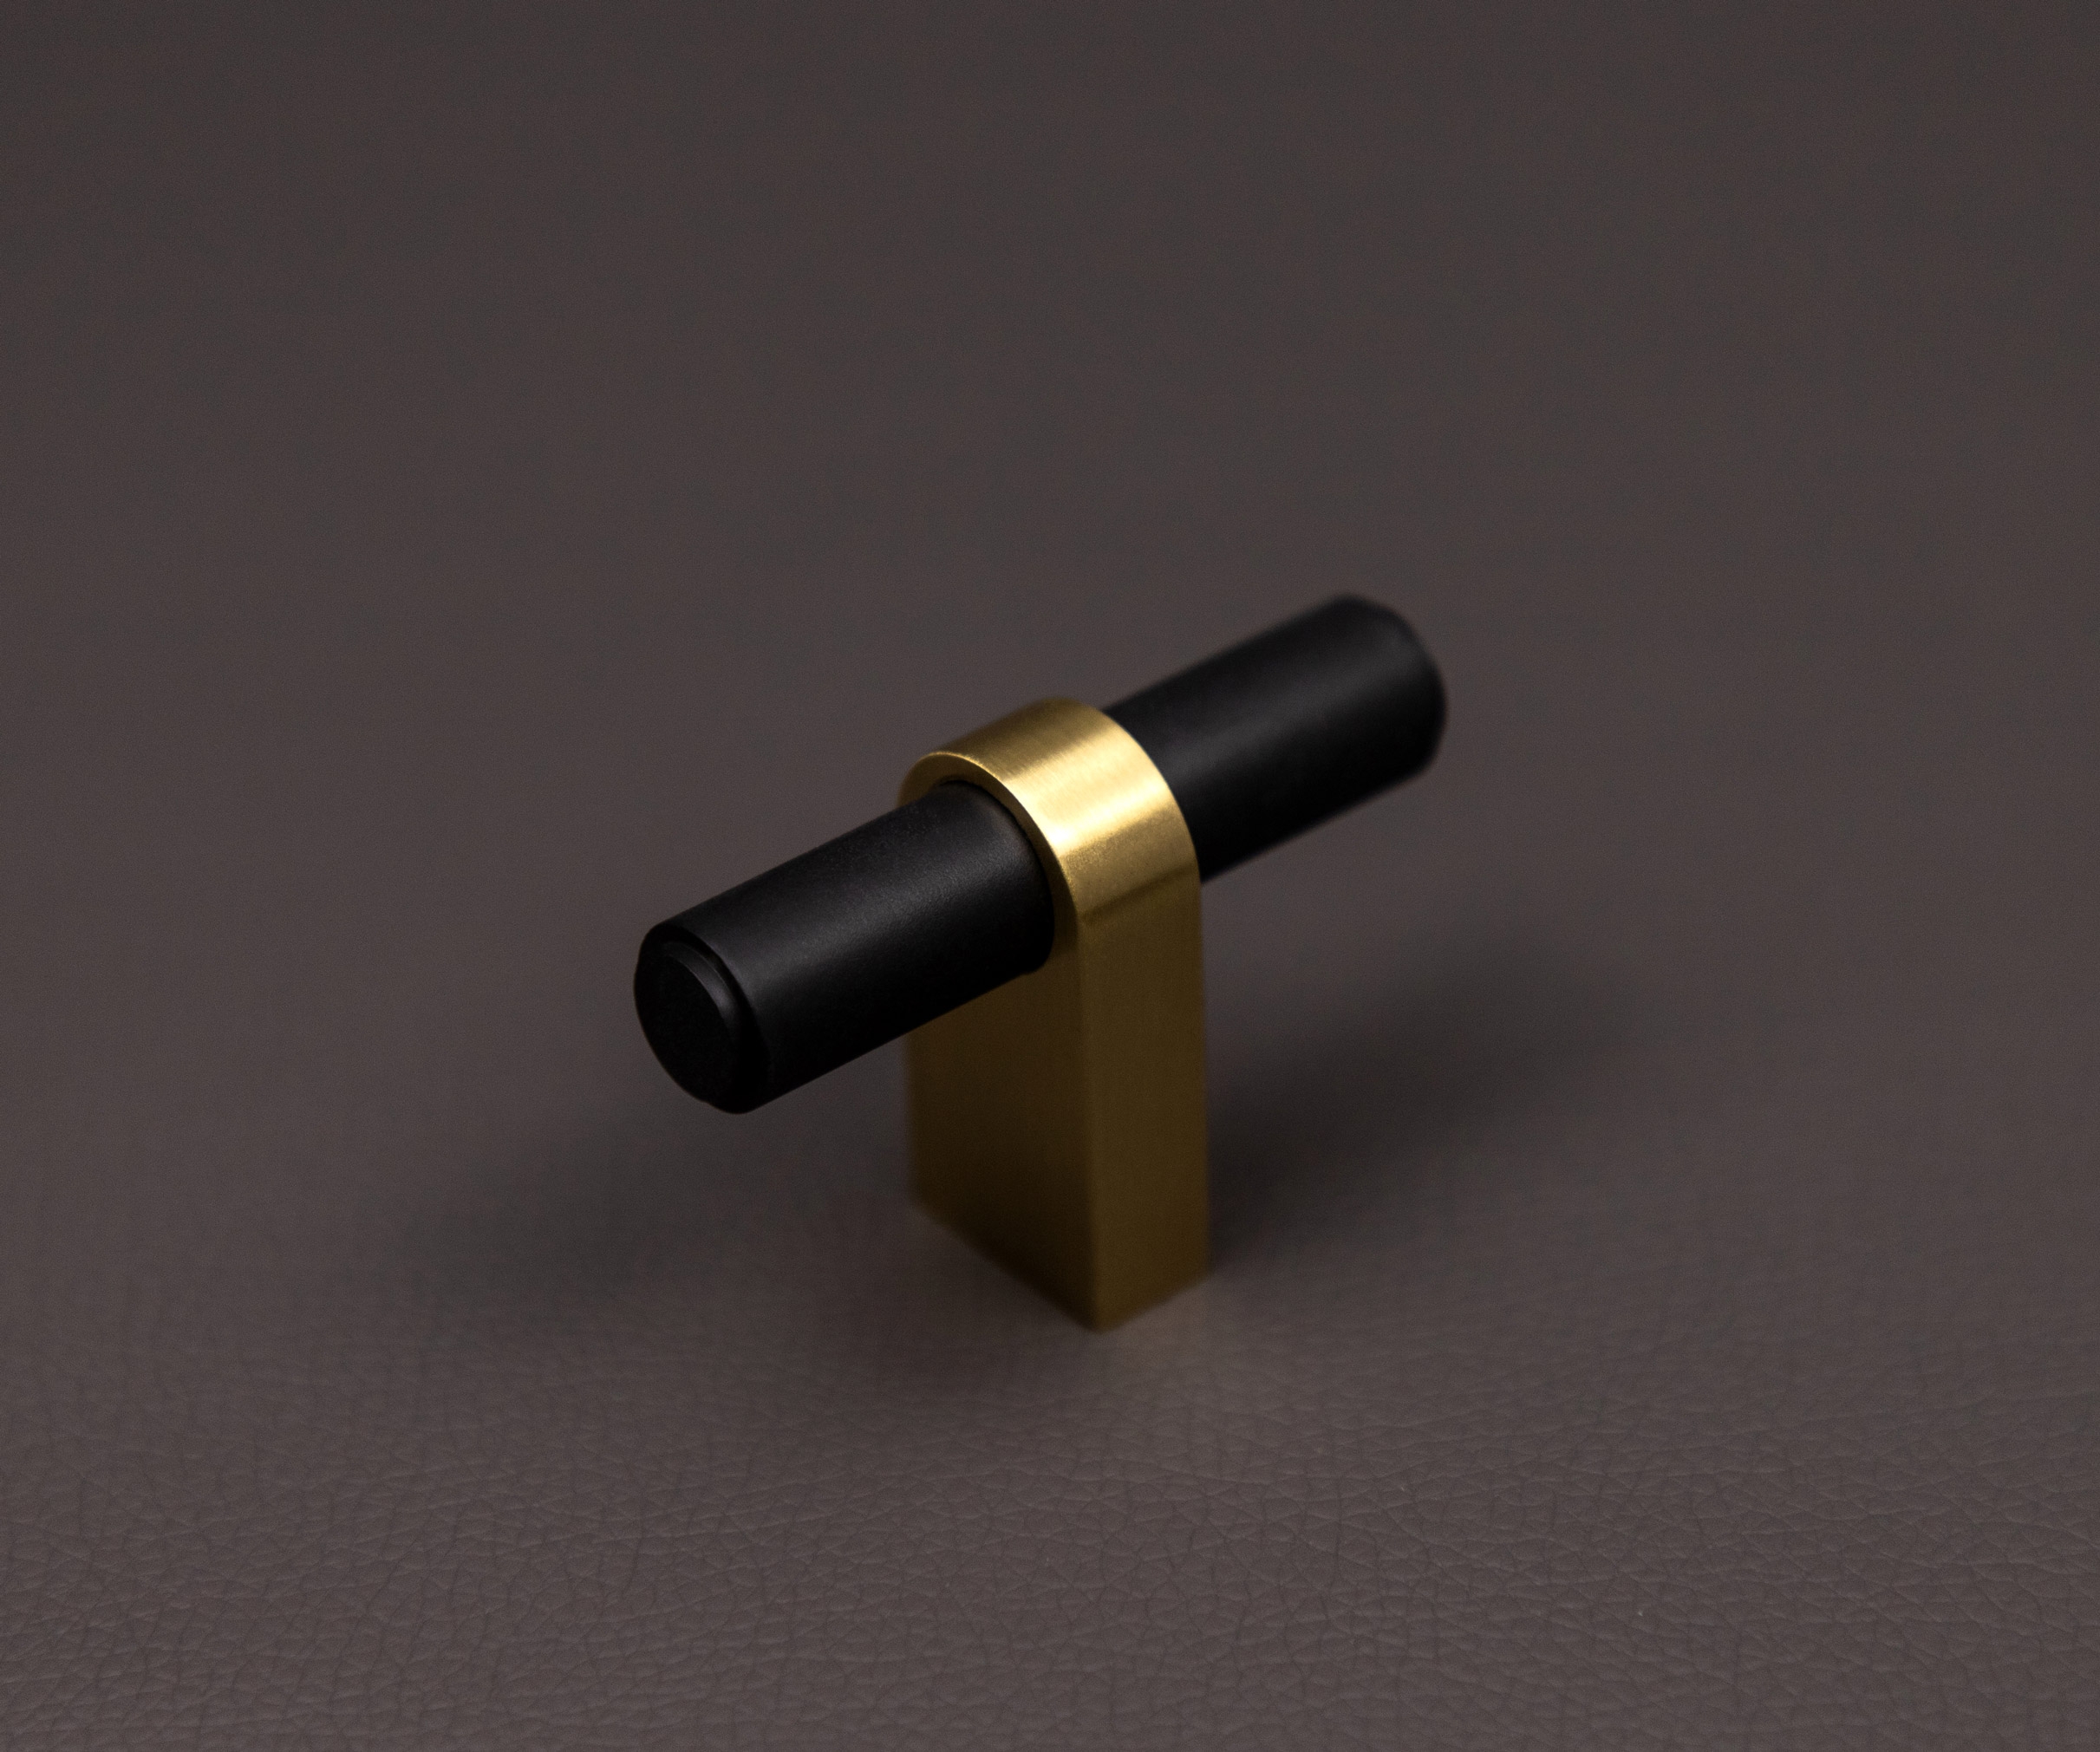 Classic T-Knob Bar with a Clean Post in Matte Satin Black and Satin Brass